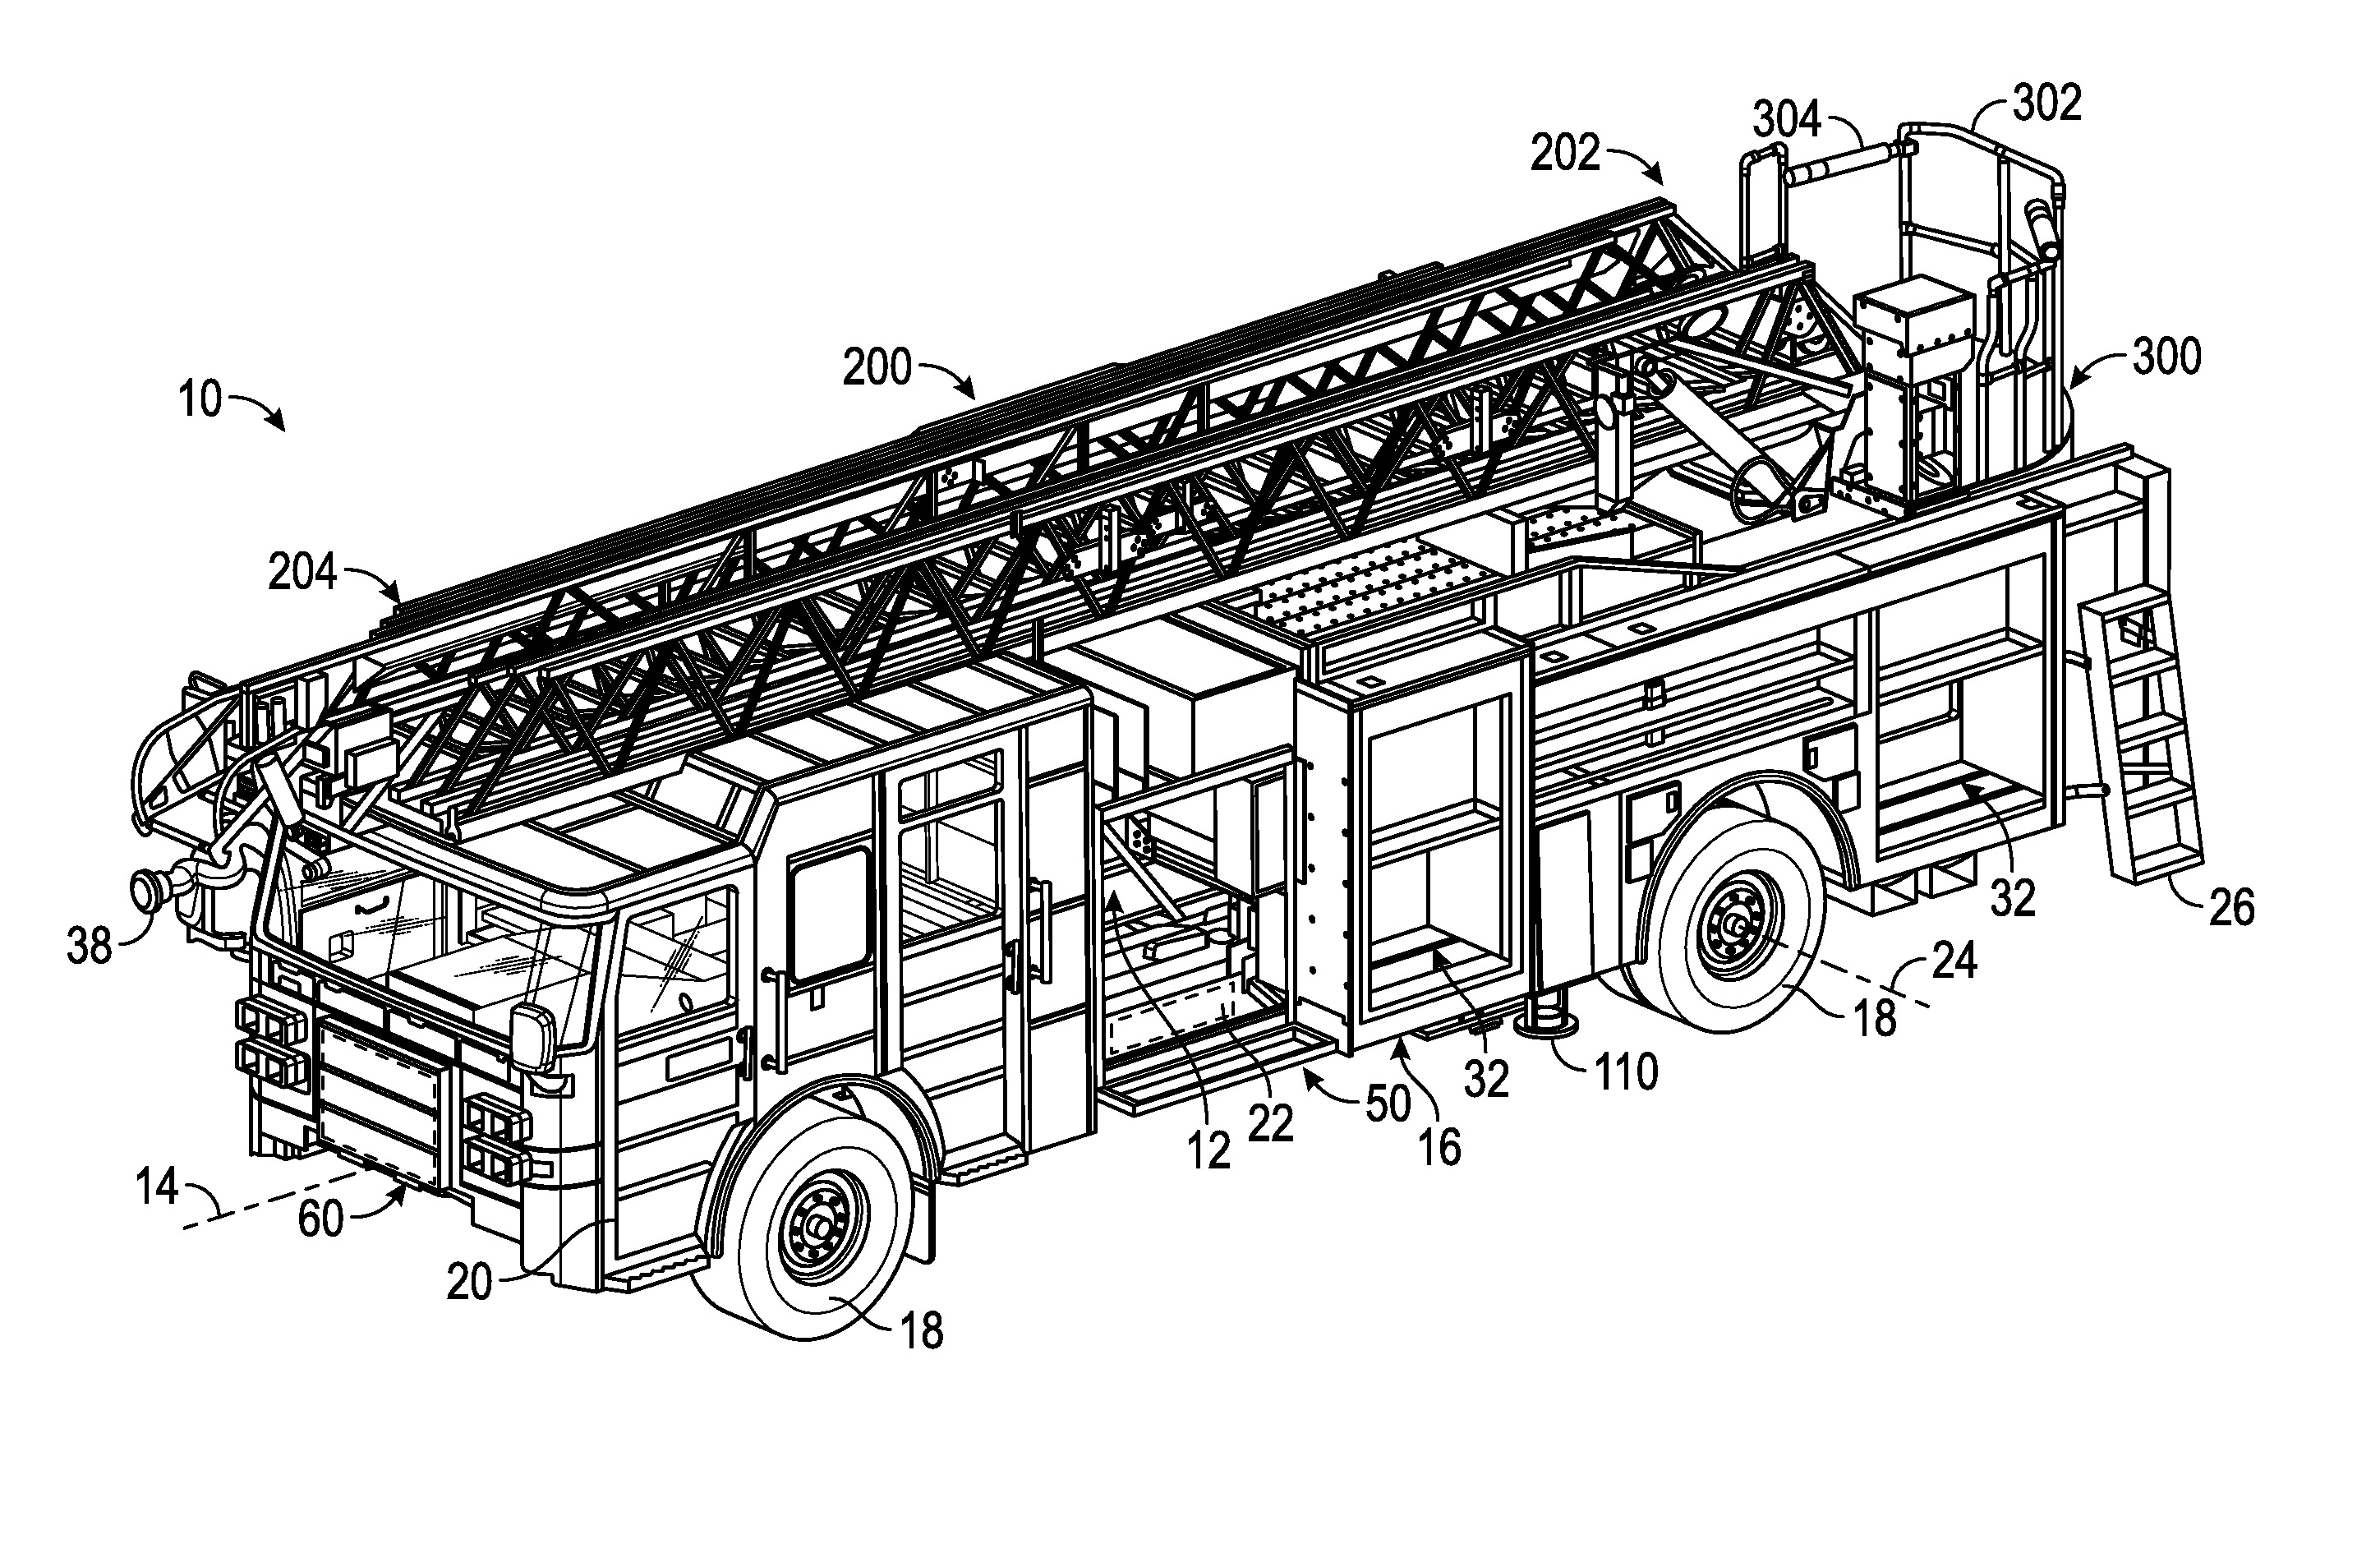 Pedestal and torque box assembly for a fire apparatus